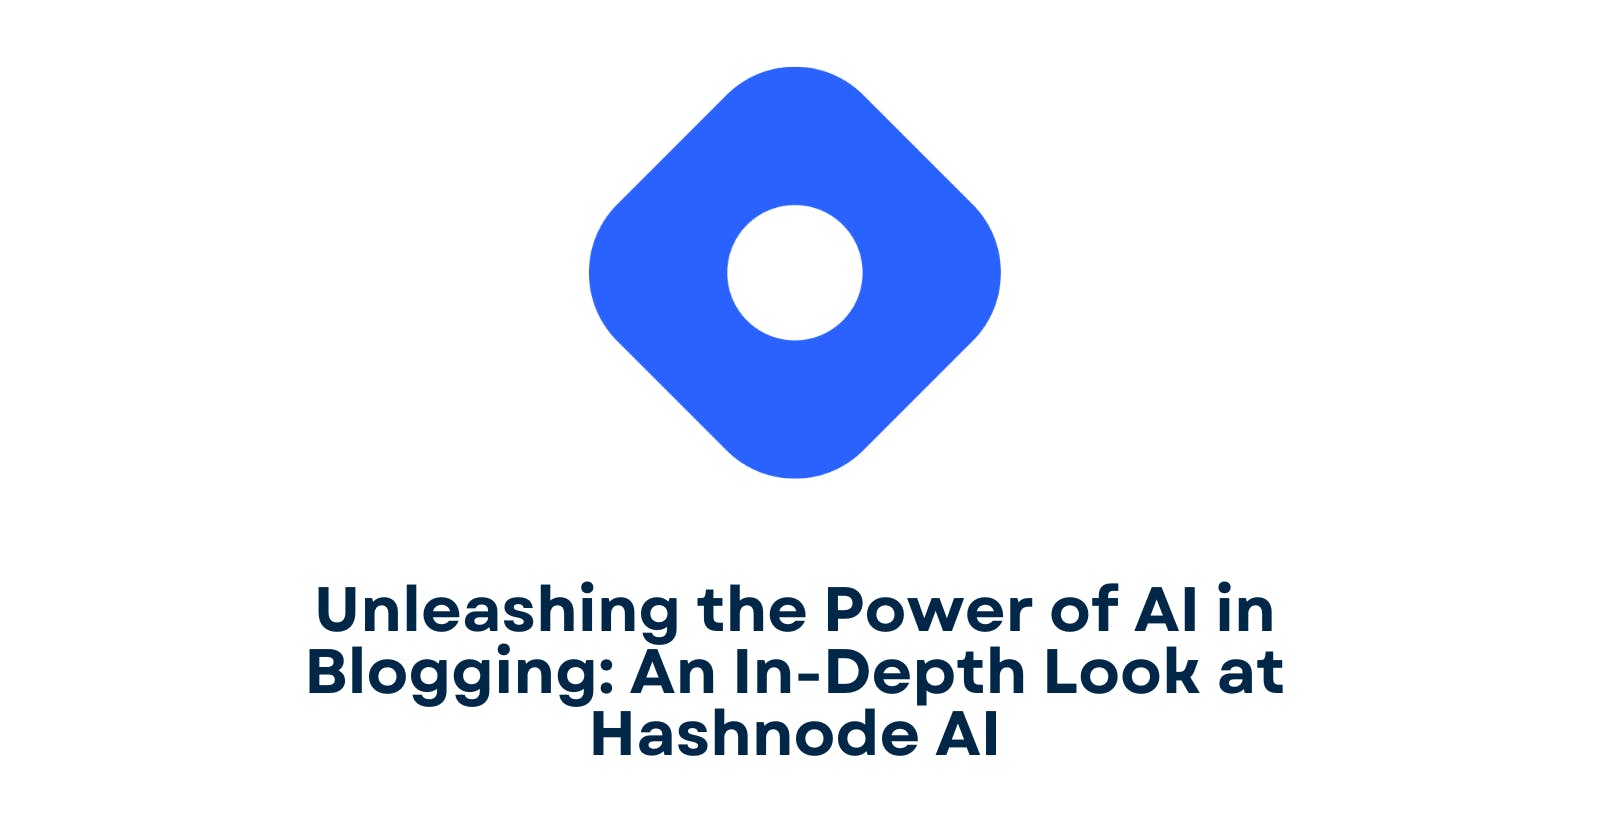 Unleashing the Power of AI in Blogging: An In-Depth Look at Hashnode AI